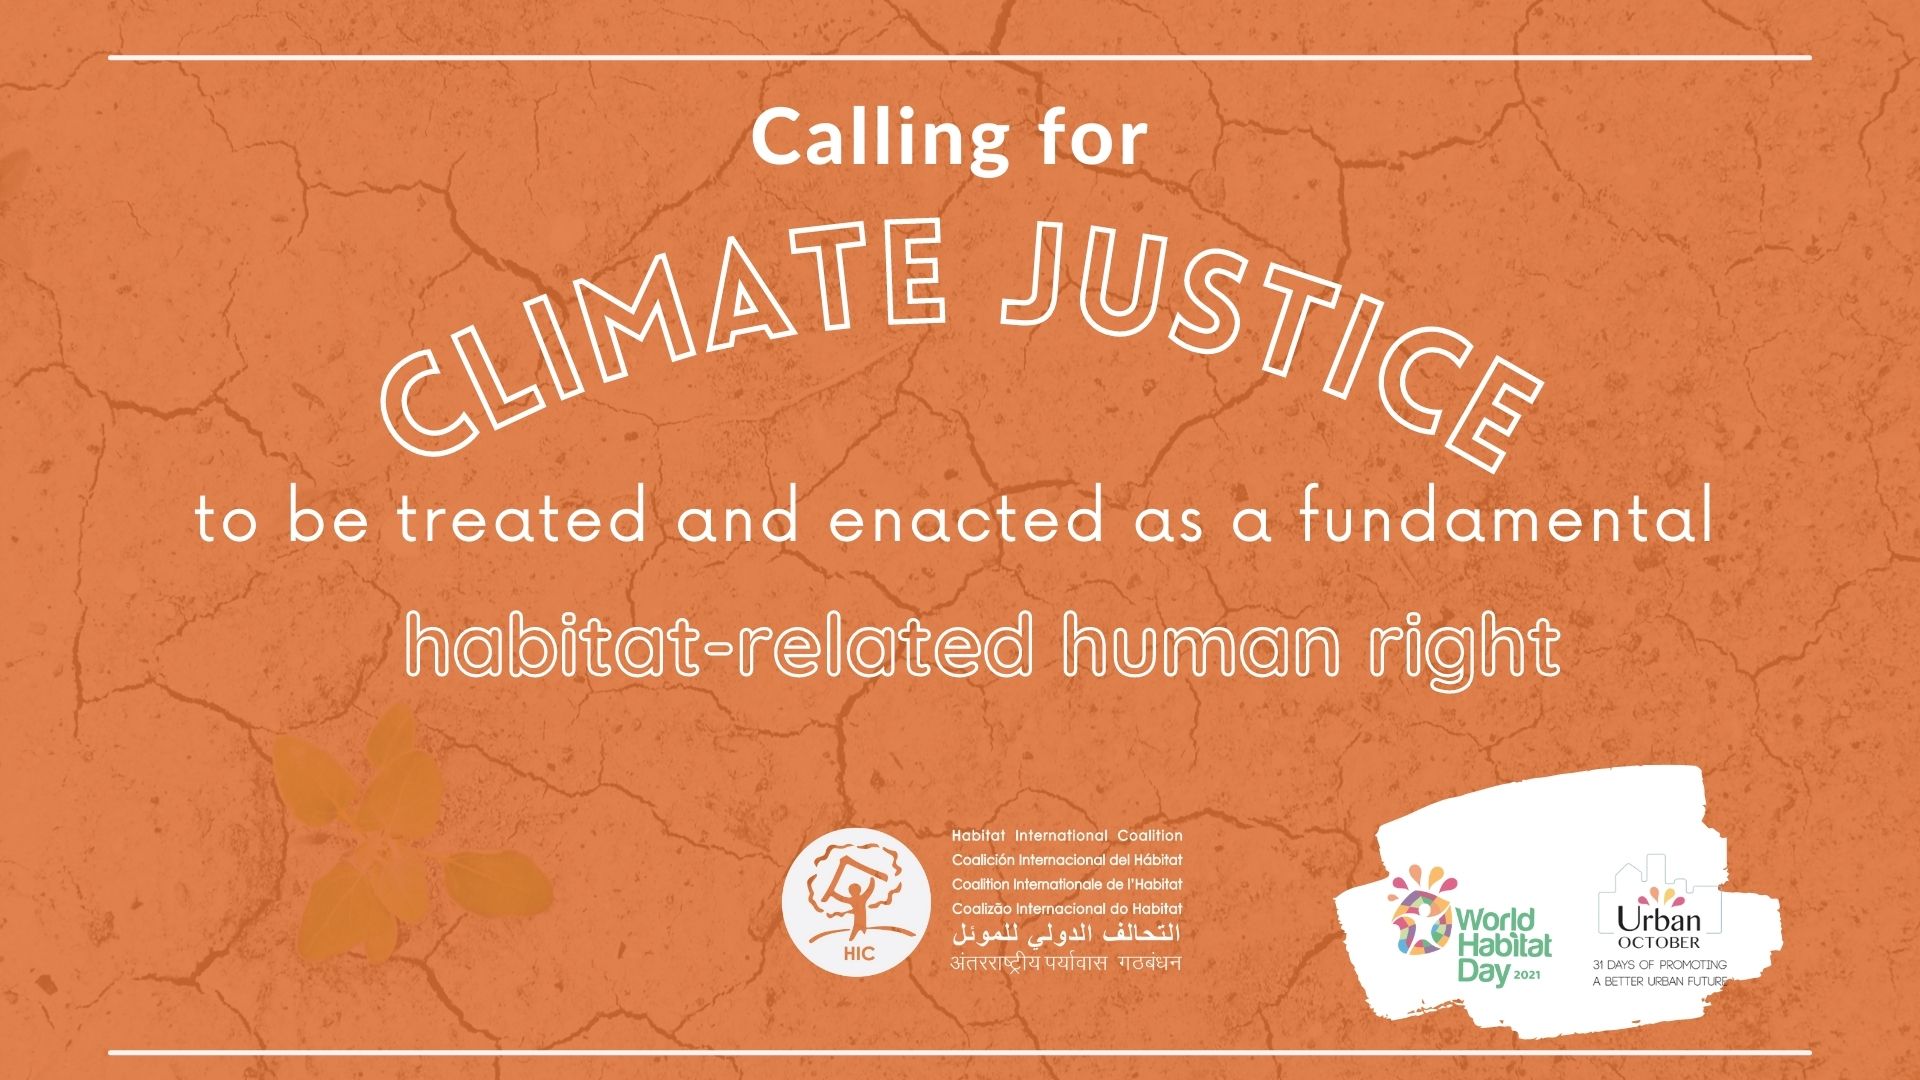 HIC president Declaration and sound bite on climate justice